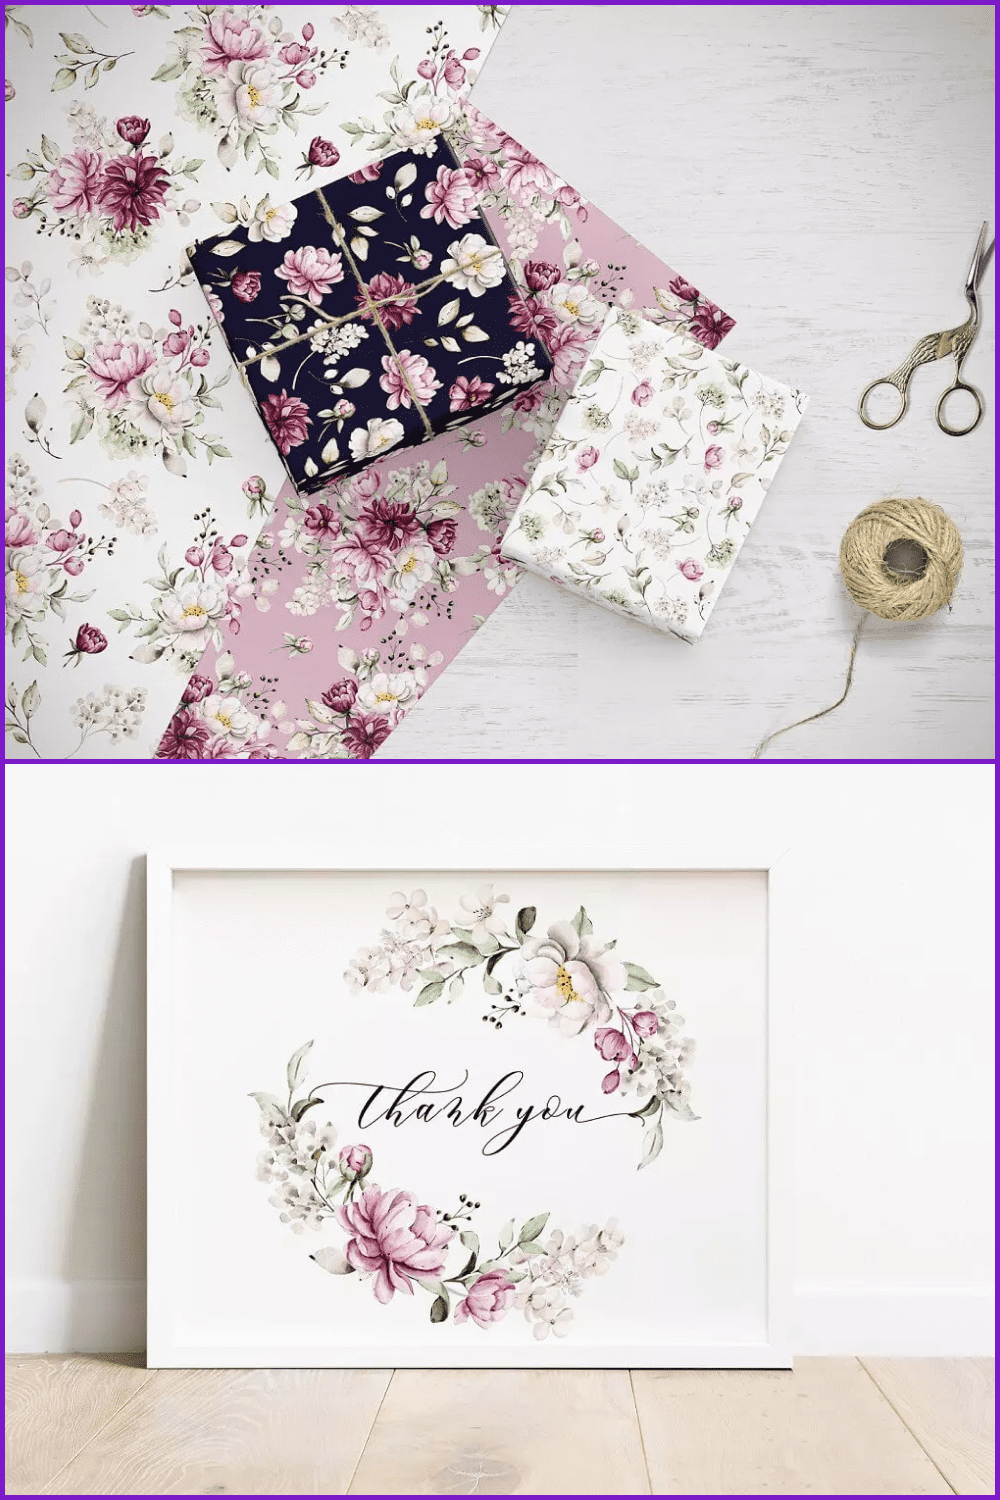 Tender peonies patterns on the painting and on the presents.